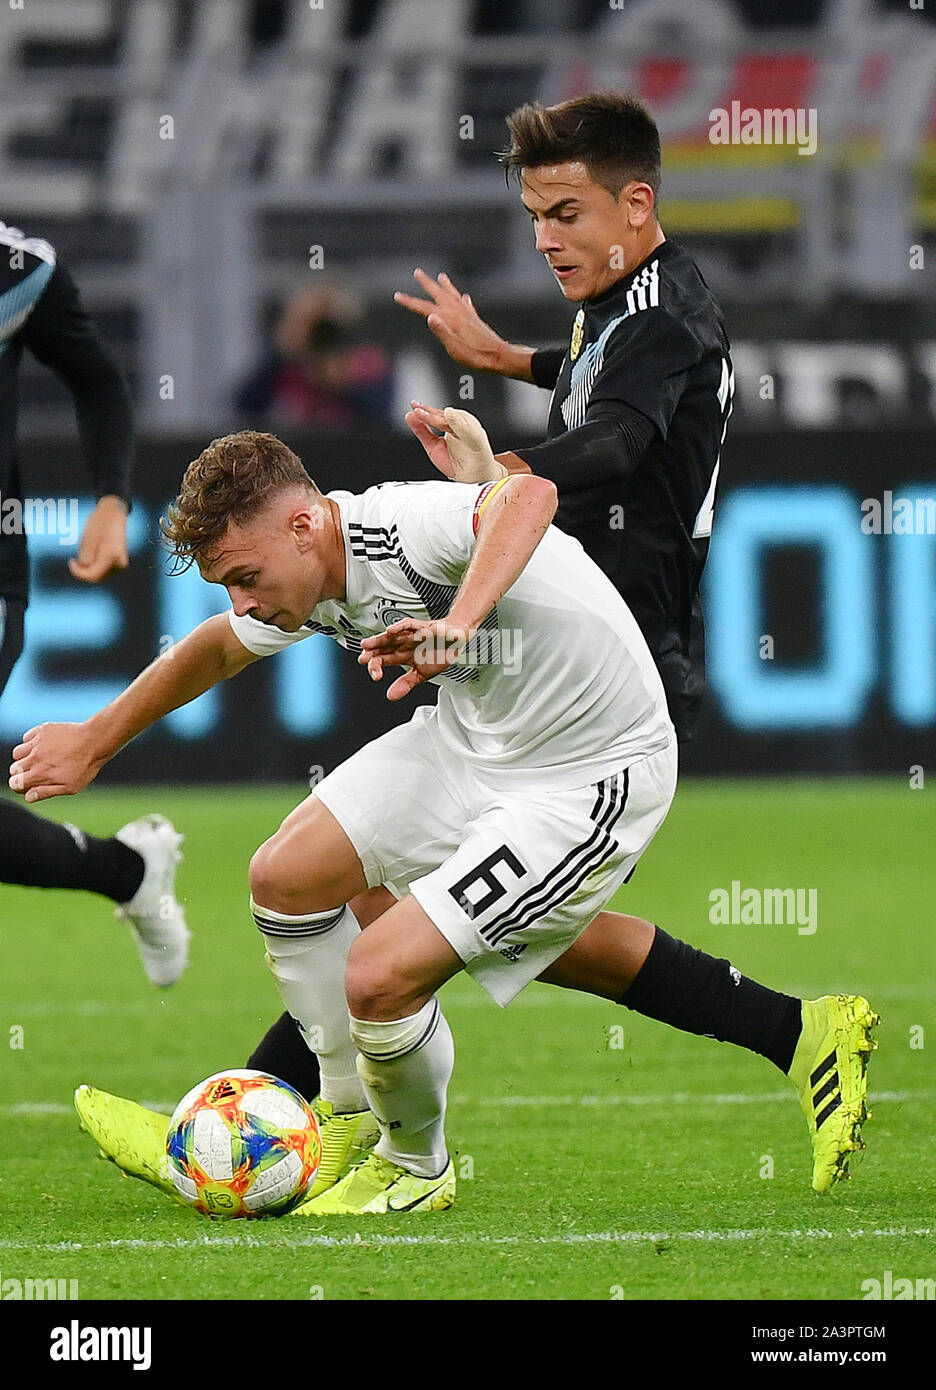 Dortmund, Germany. 9th Oct, 2019. Joshua Kimmich (front) of Germany vies with Paulo Dybala of Argentina during an international friendly soccer match between Germany and Argentina in Dortmund, Germany, Oct. 9, 2019. Credit: Ulrich Hufnagel/Xinhua/Alamy Live News Stock Photo